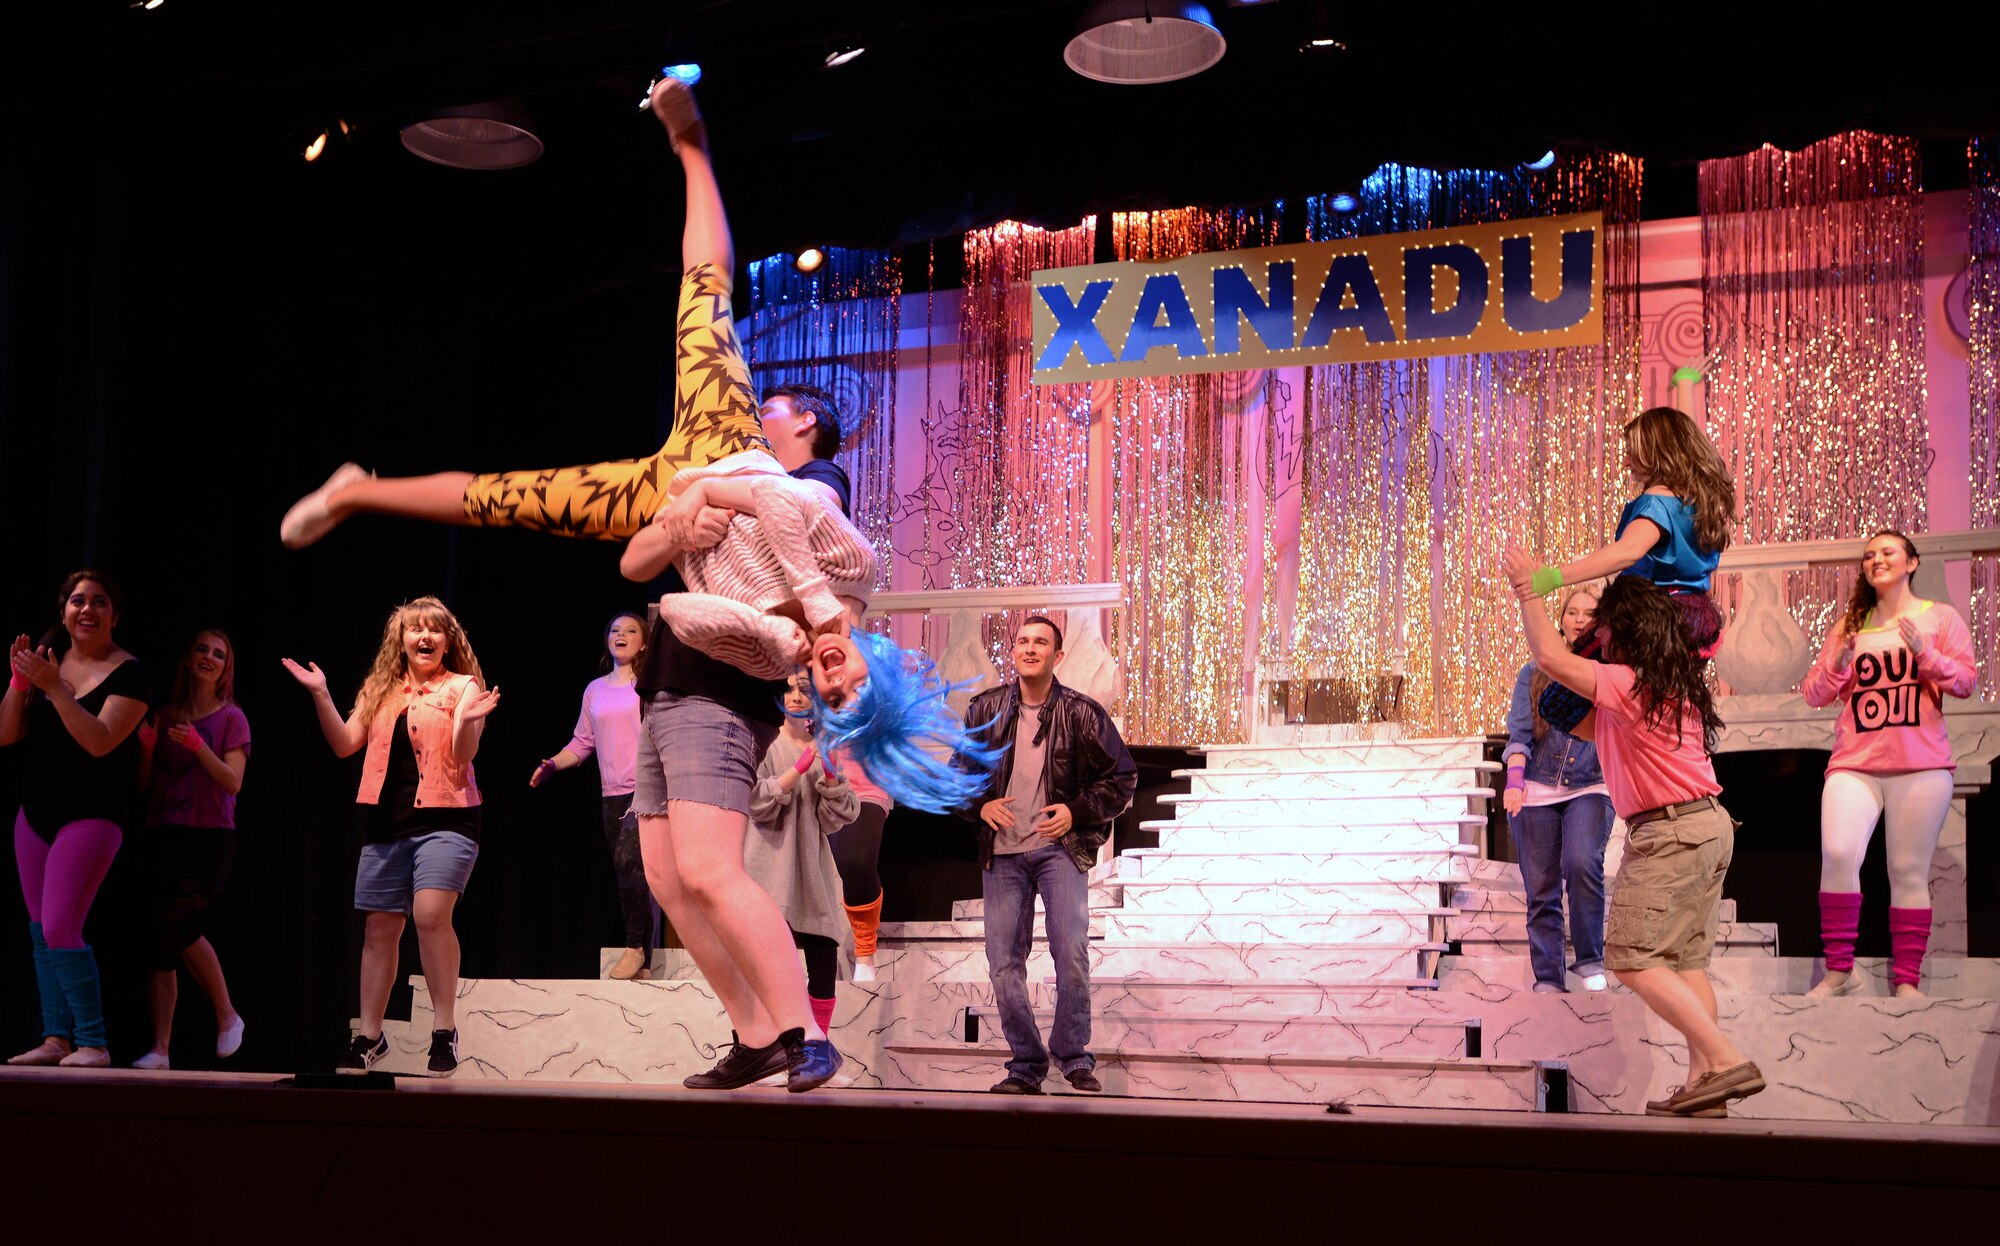 Members of the cast dance for their last act during the Aviano Community Theater dinner theater performance of “Xanadu,” March 15, 2014, at Aviano Air Base, Italy. “Xanadu” is an ‘80s love story between an uninspired artist and a Greek muse who helps him fulfill a lifelong dream of opening a roller disco. (U.S. Air Force photo/Airman 1st Class Deana Heitzman)        